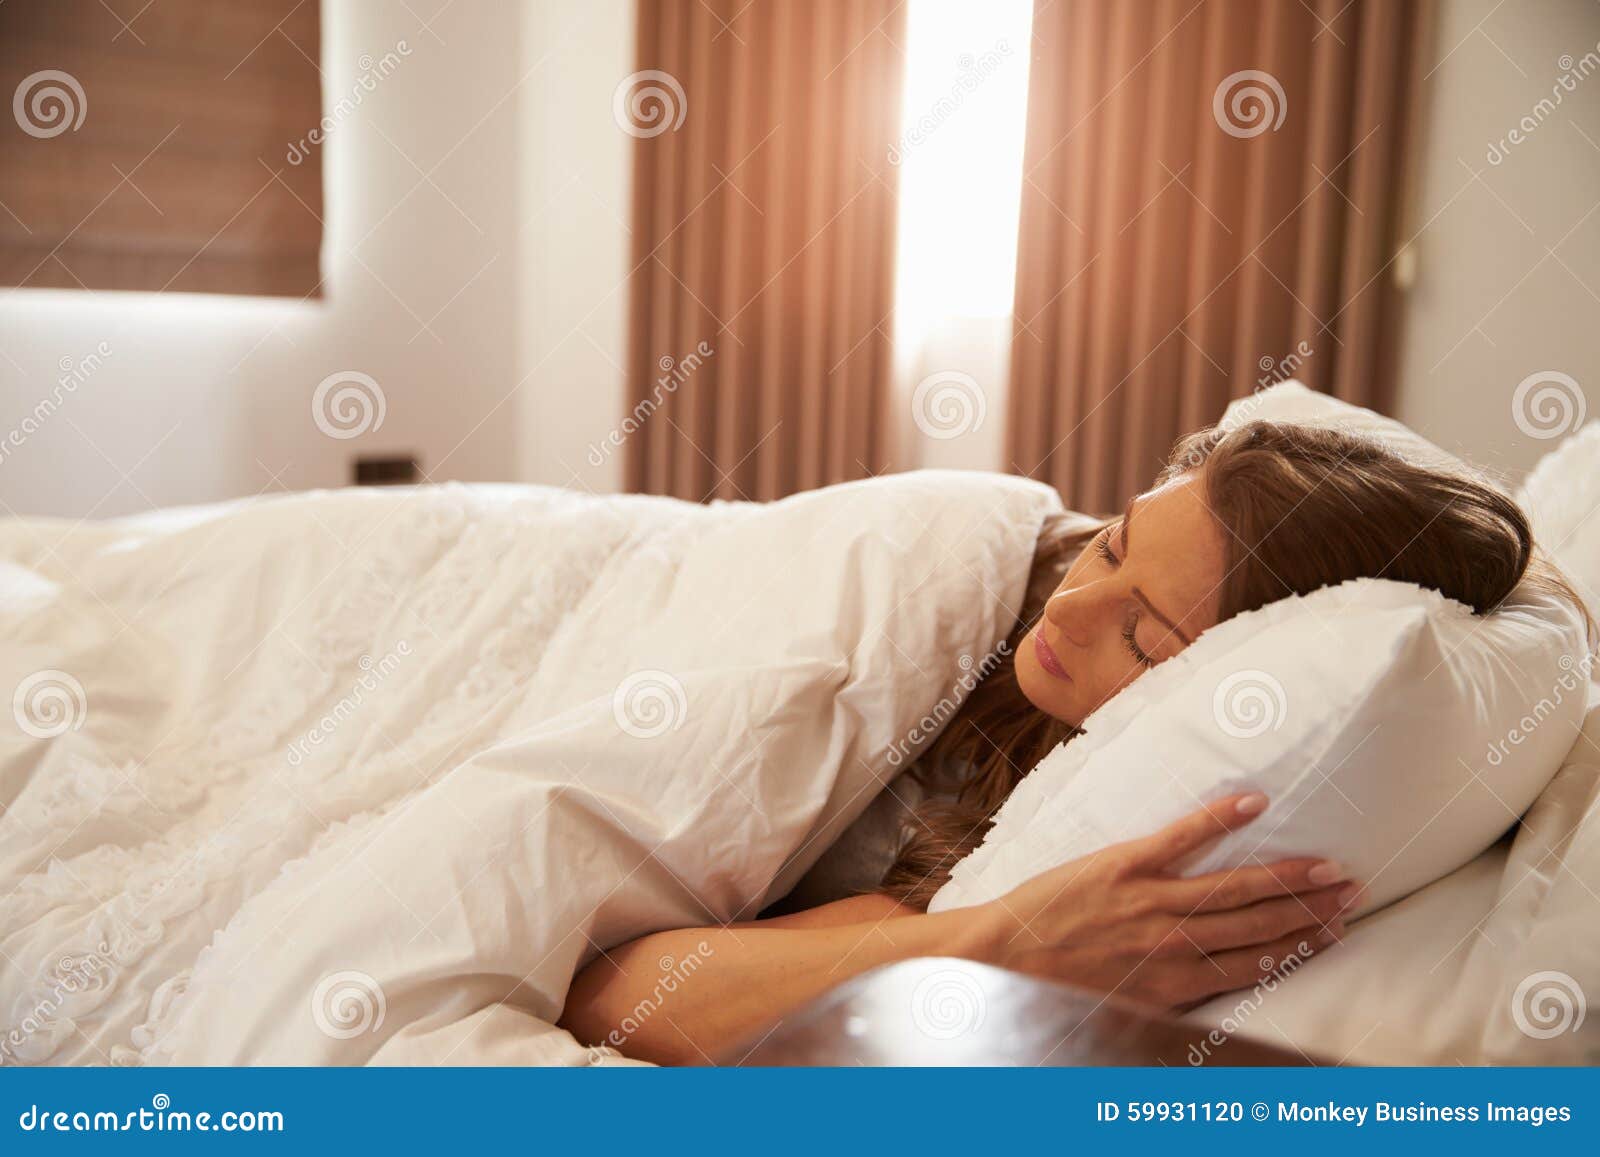 woman asleep in bed as sunlight comes through curtains